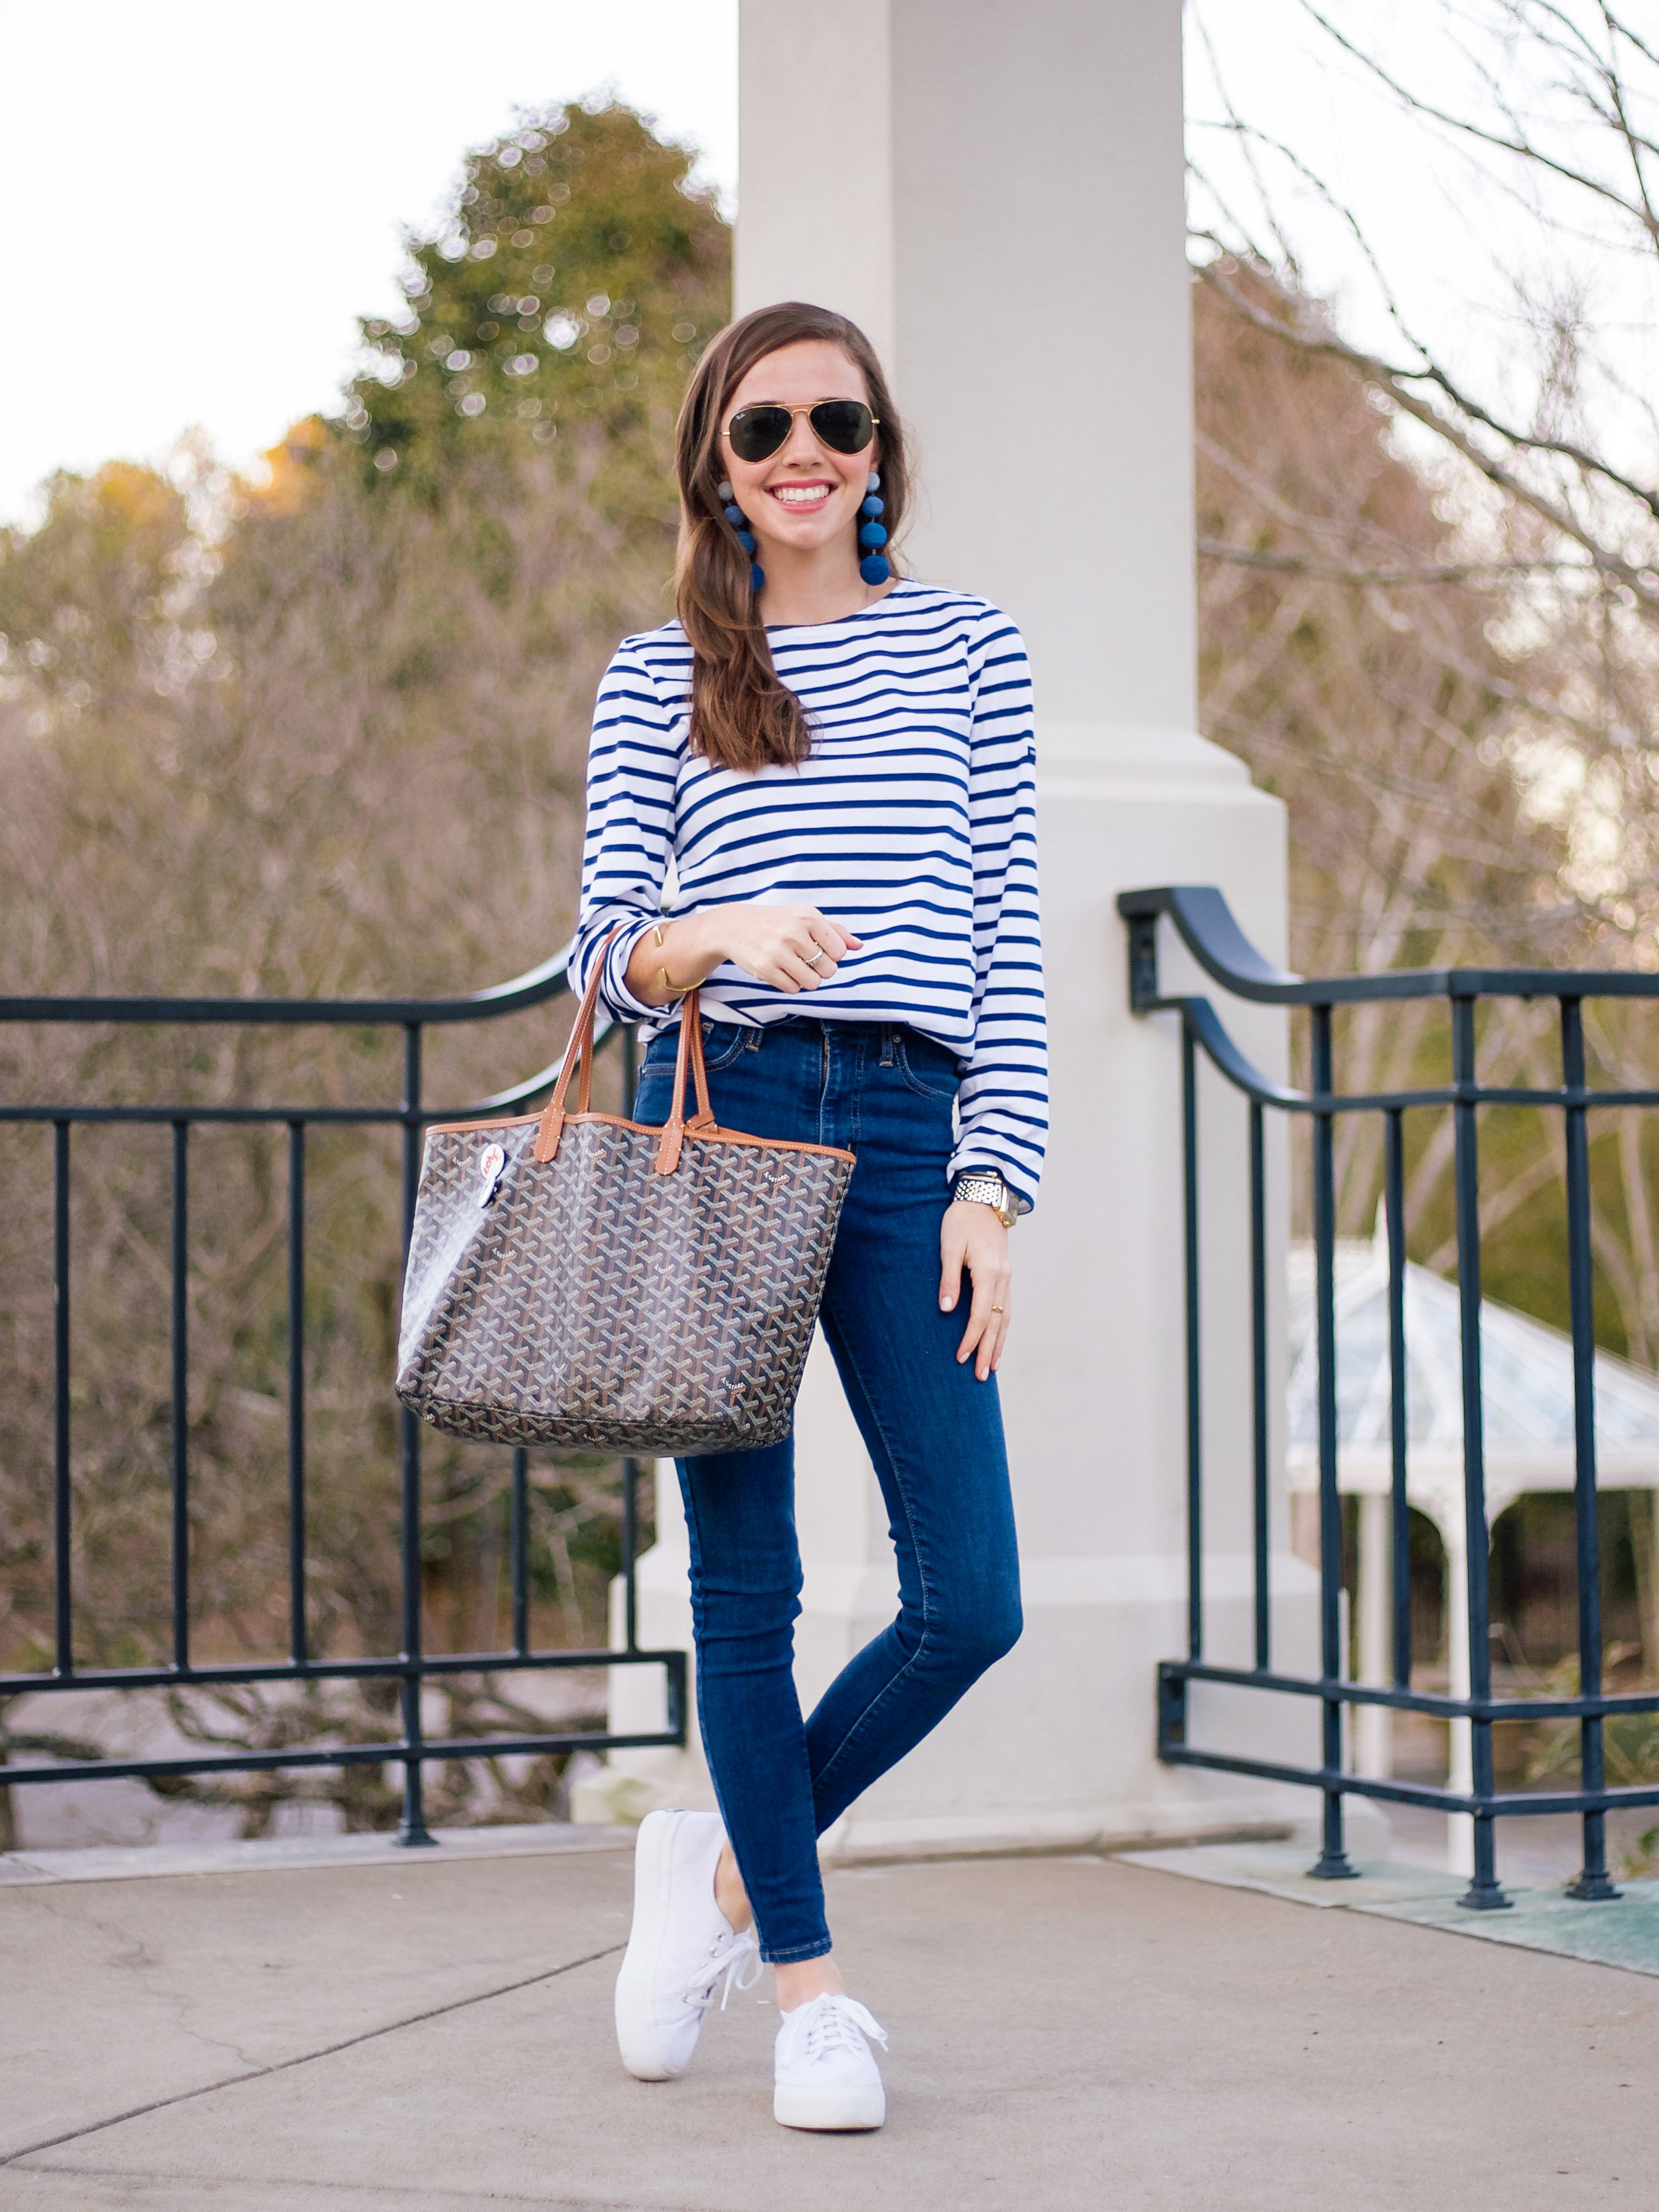 Are Skinny Jeans In Or Out Of Style?